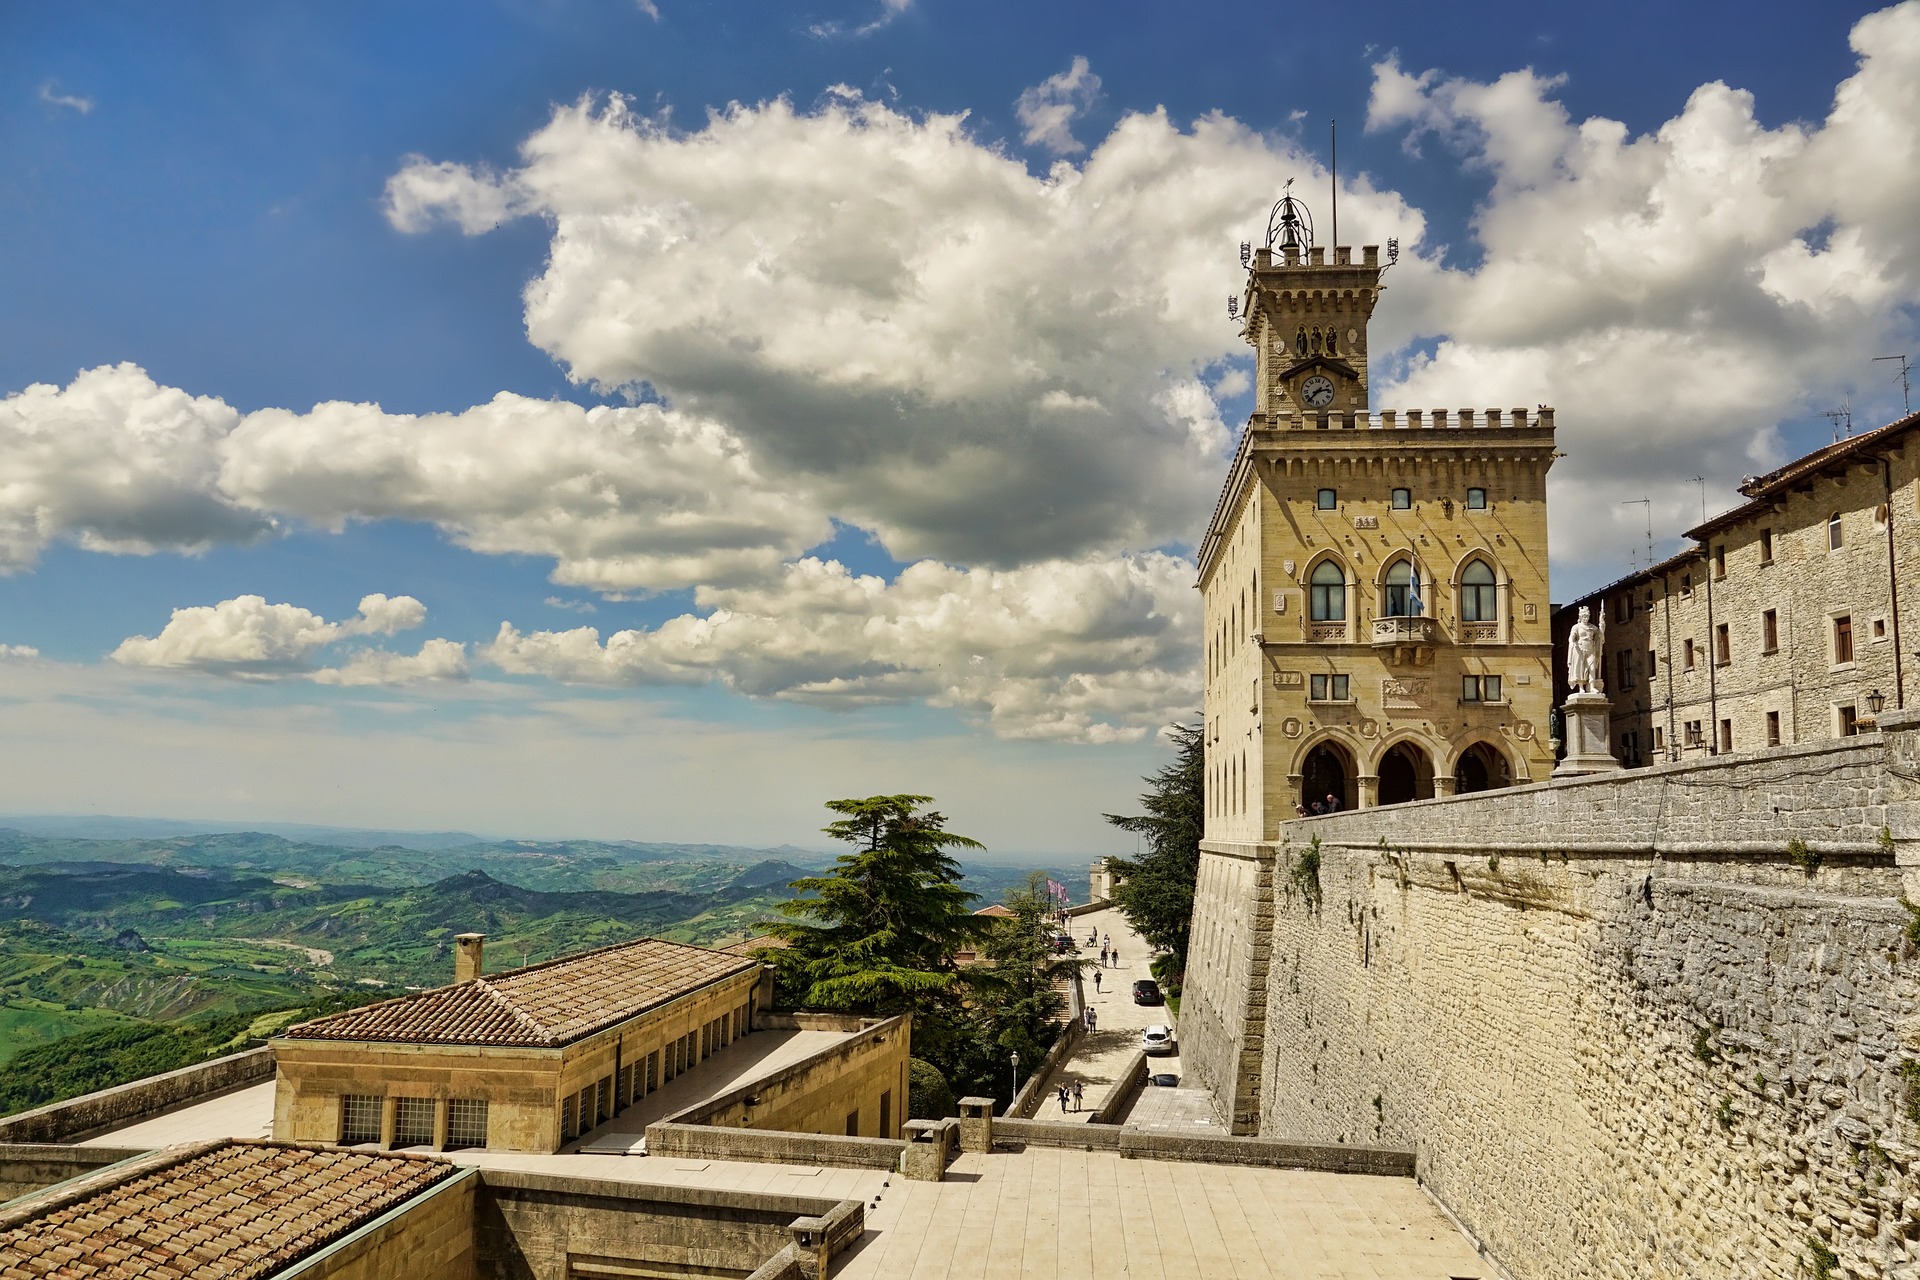 The one-of-a-kind San Marino, a UNESCO World Heritage site